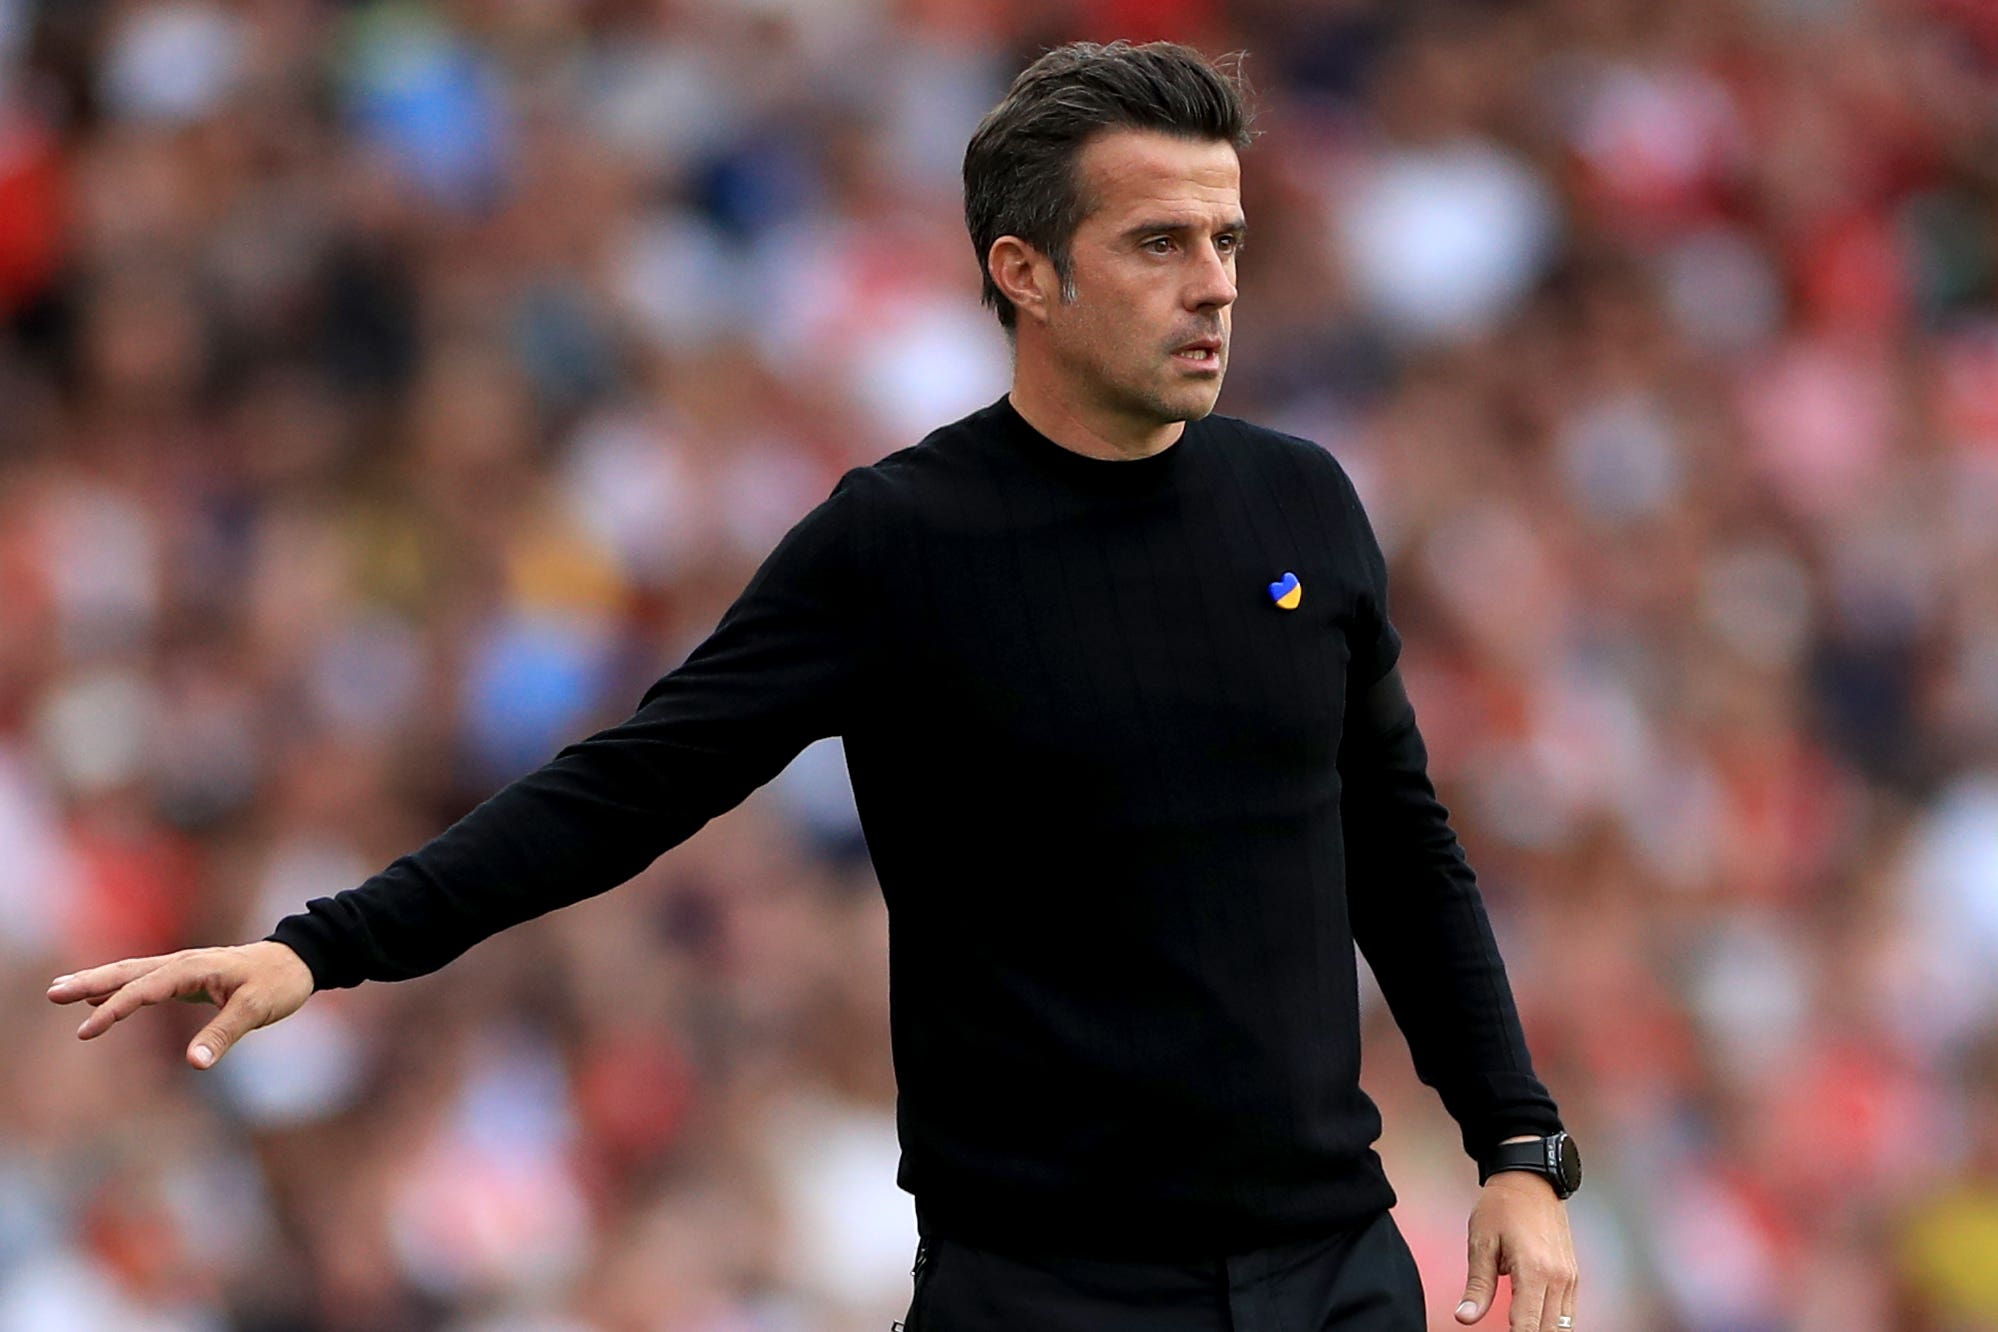 Fulham boss Marco Silva: We are really an ambitious football club right now  | The Independent